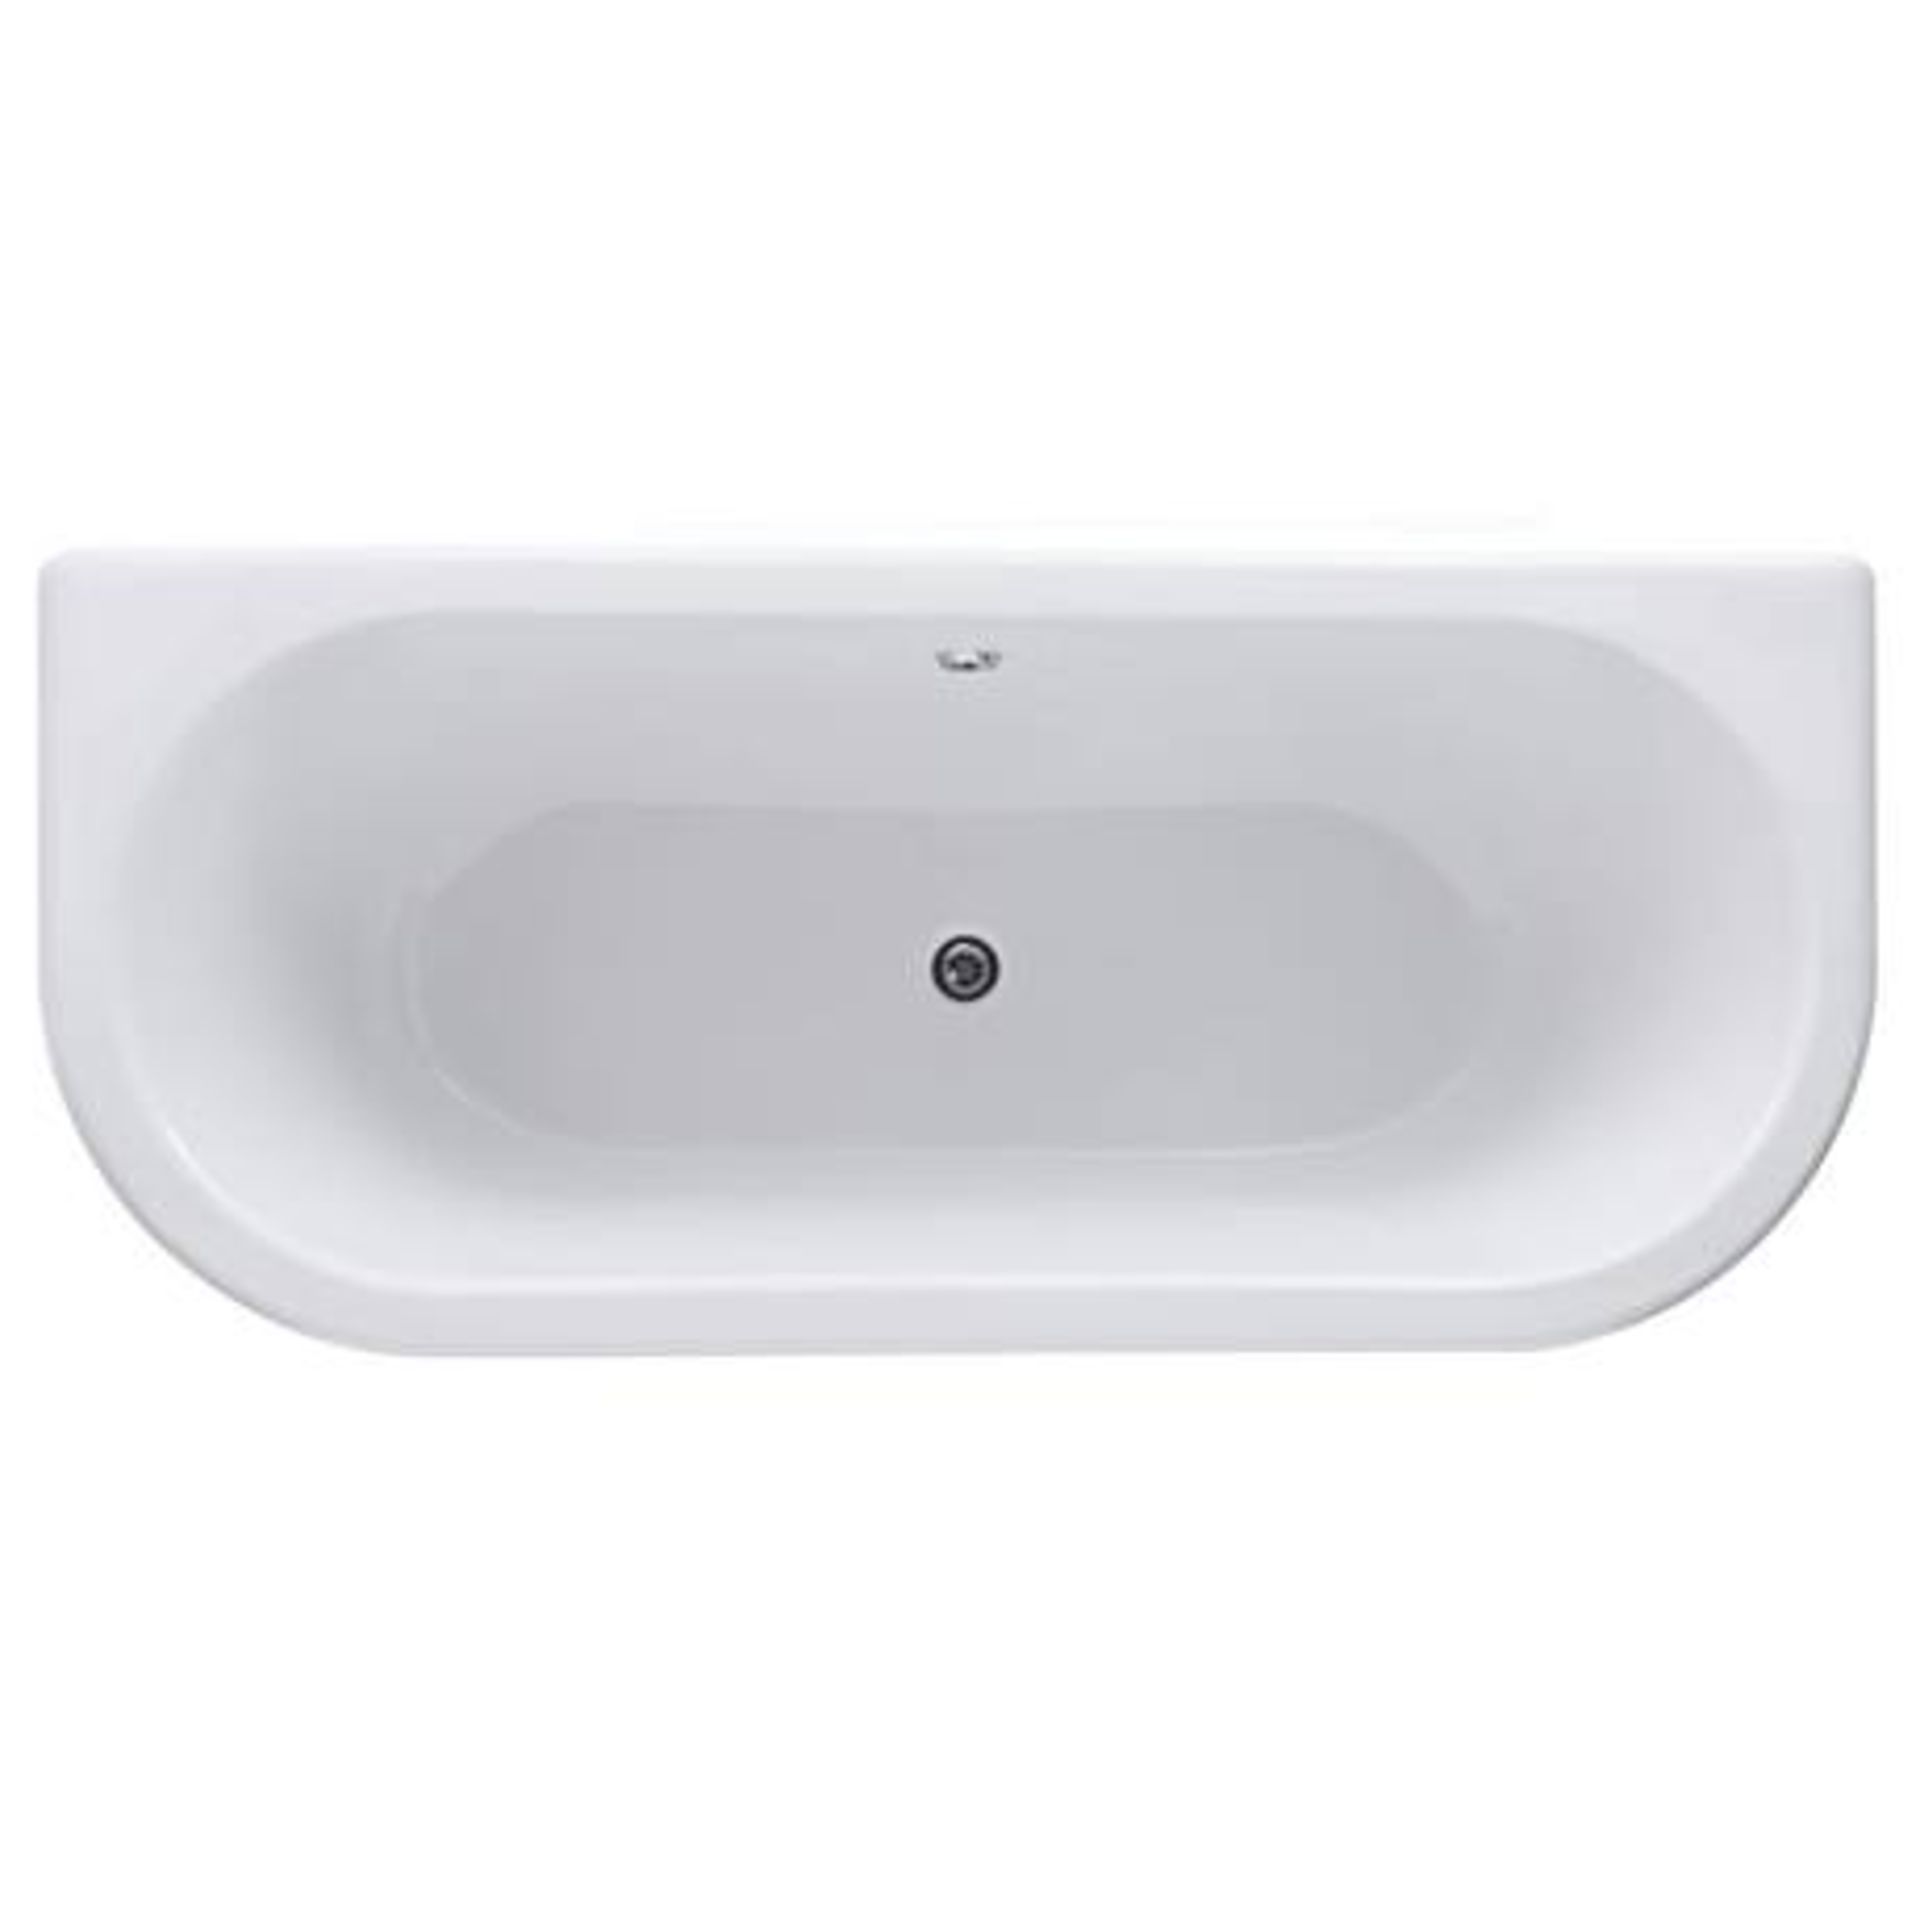 New (P3) 1700x750mm D Shape Roll Top Slipper Tradiational Bath. Rrp £1,099. Comes Complete Wit... - Image 2 of 2